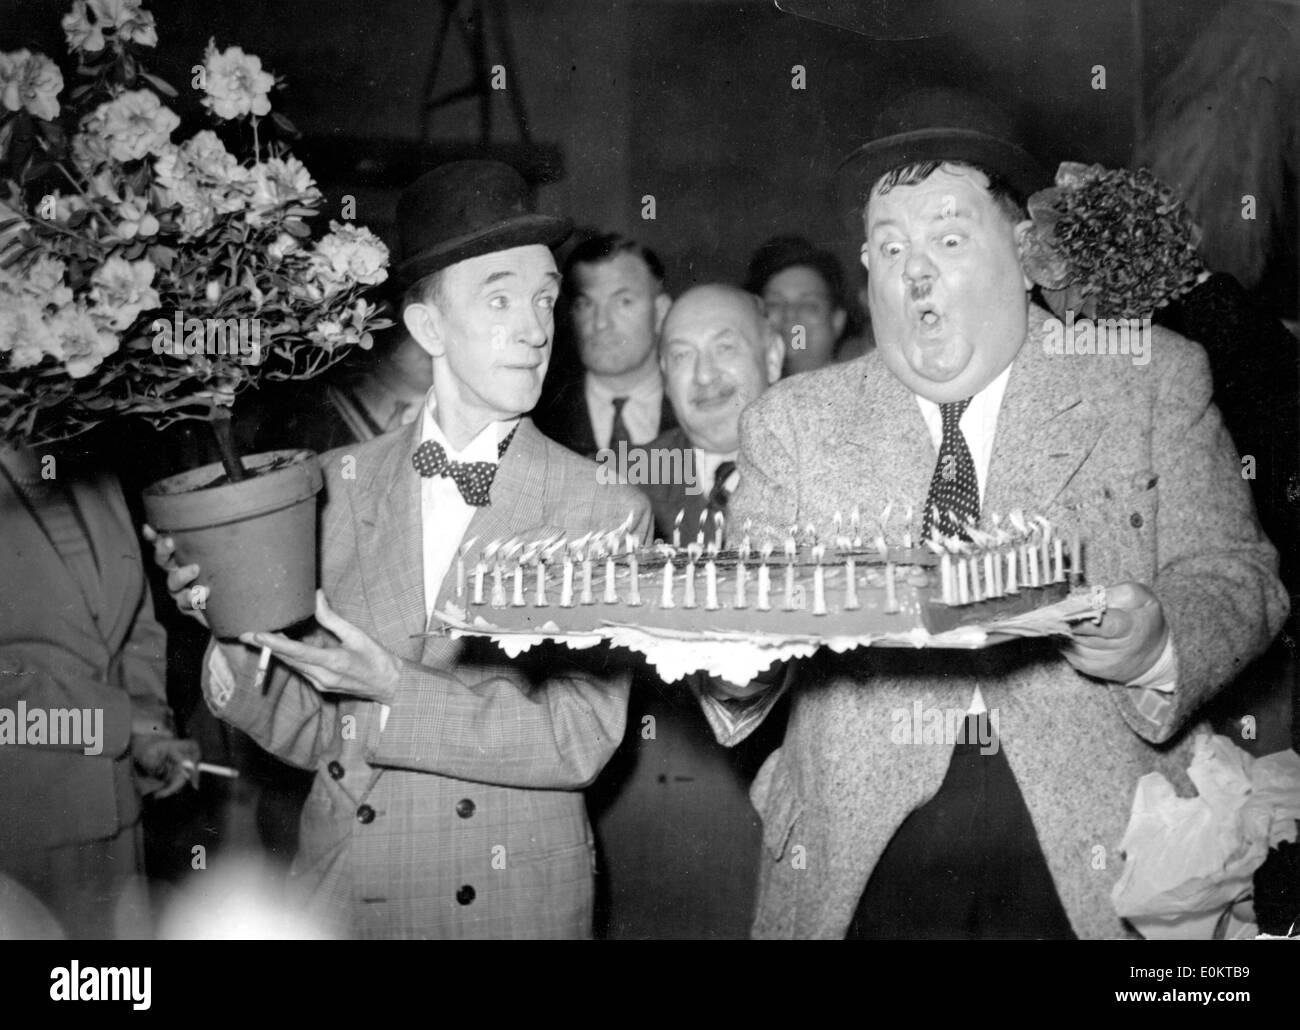 Comedians Stan Laurel and Oliver Hardy at a birthday party Stock Photo